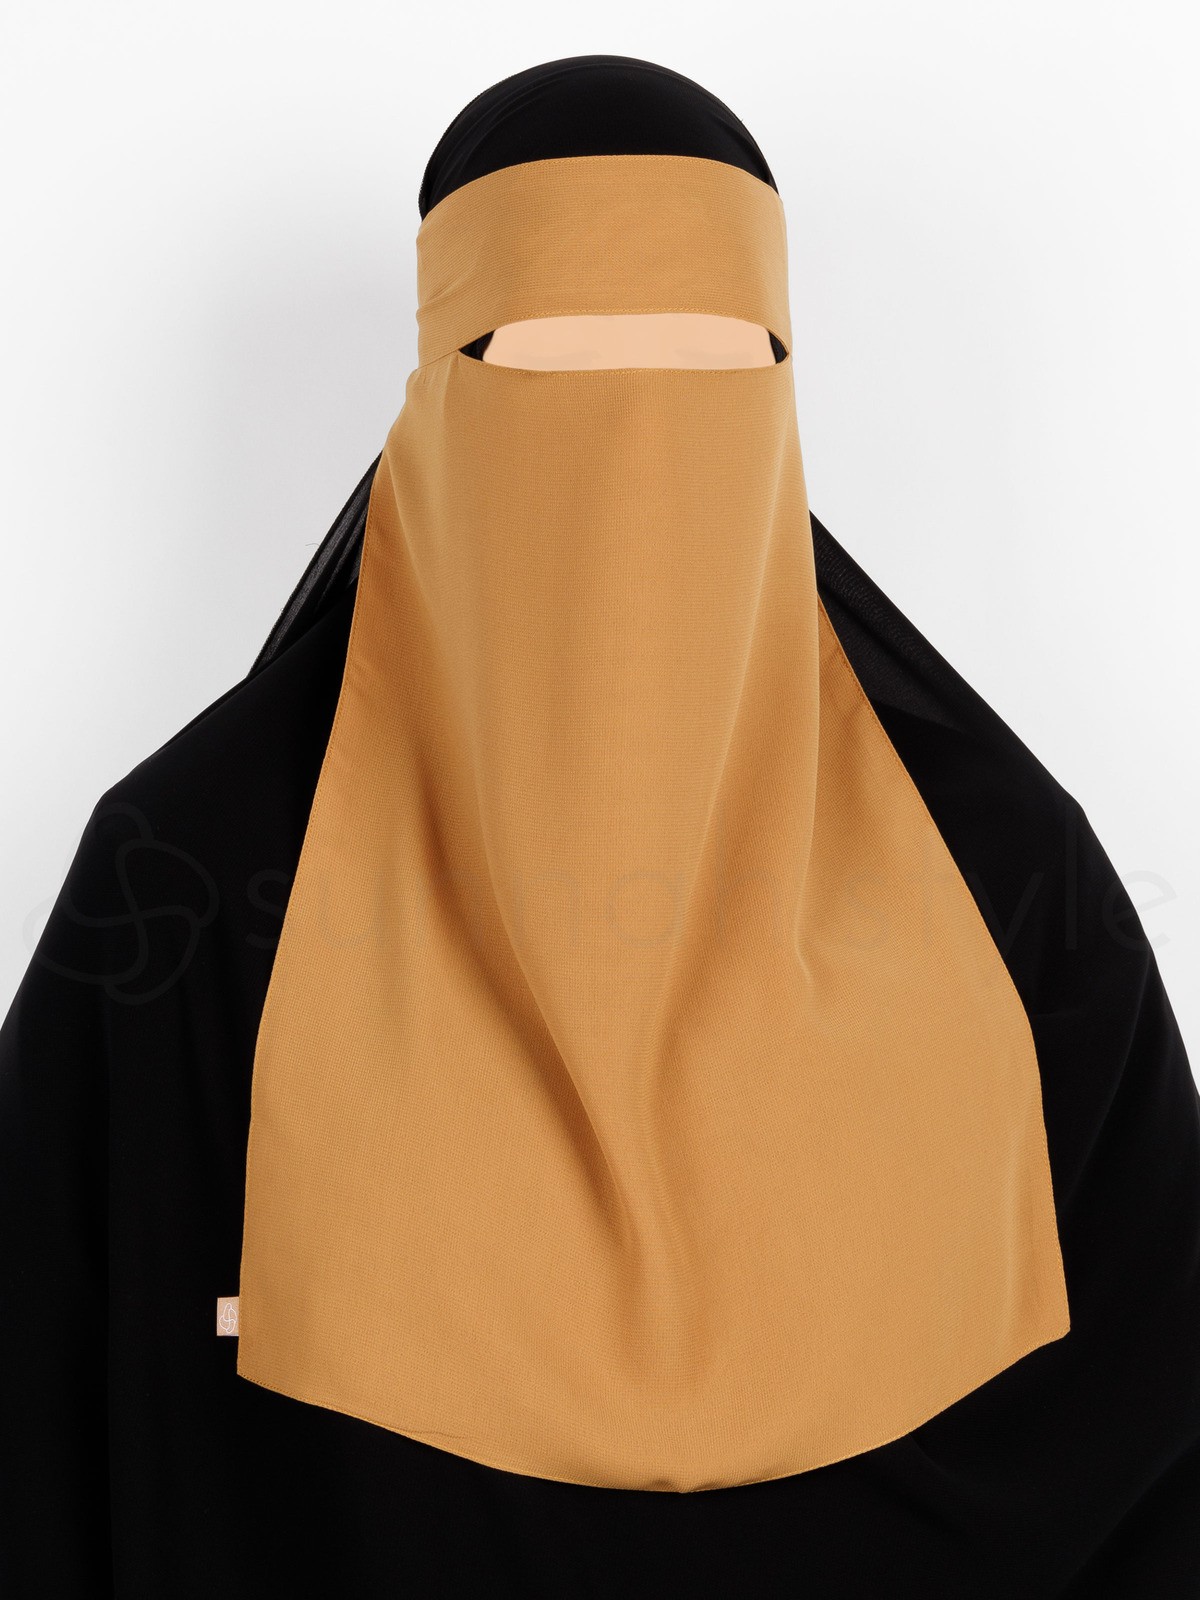 Sunnah Style - One Layer Niqab (Honey)